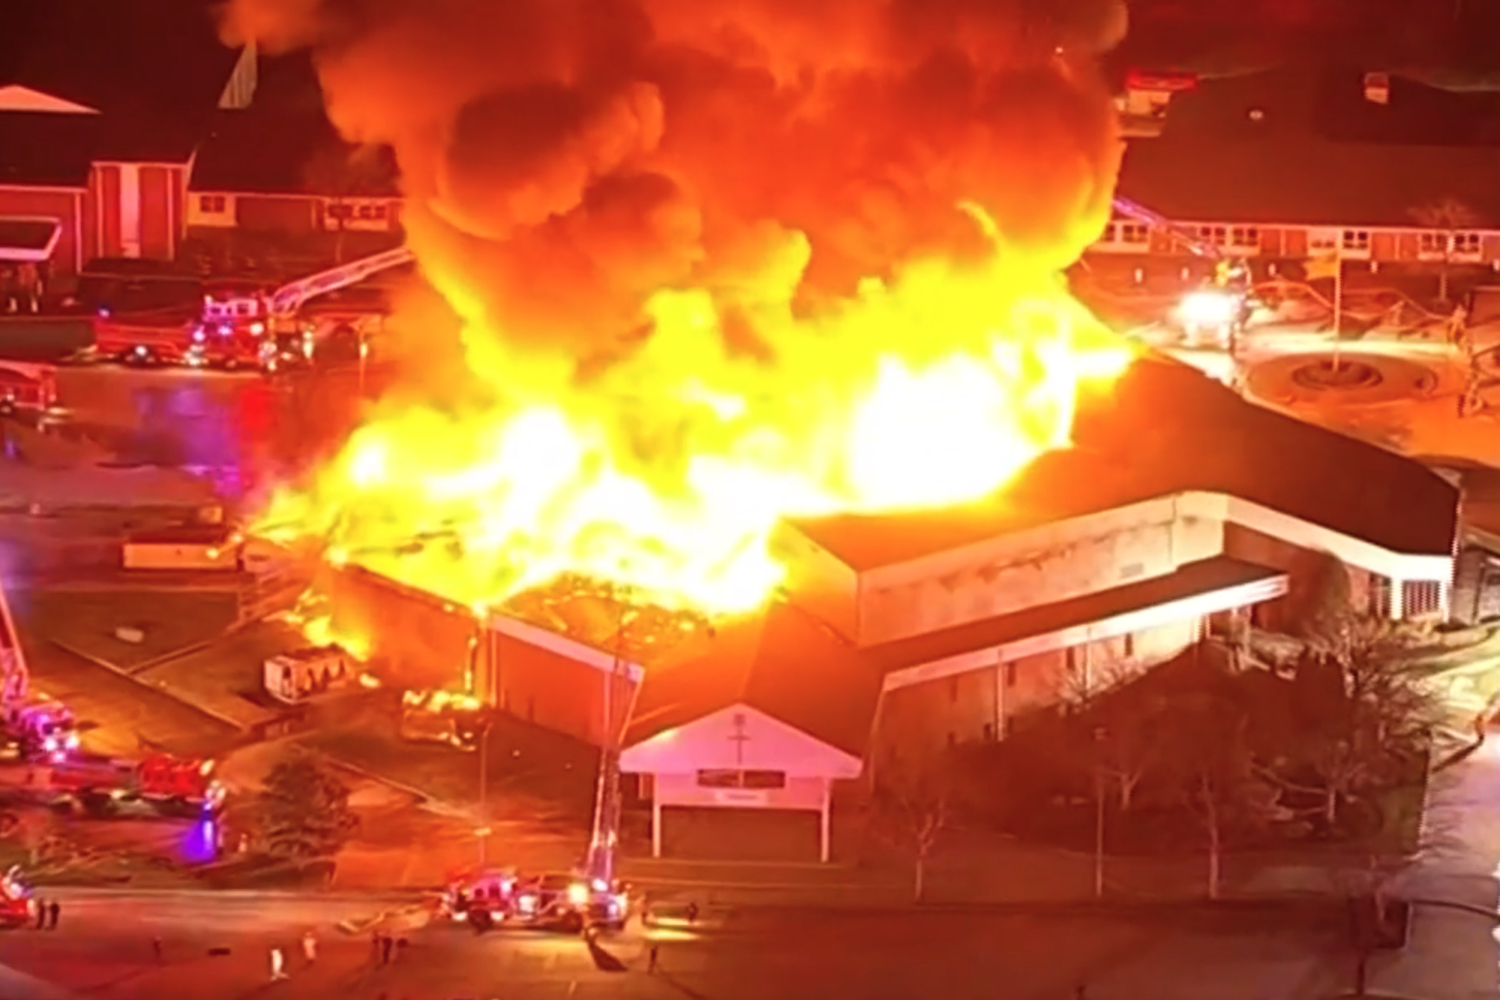 Video shows New Jersey church in flames as massive fire destroys building